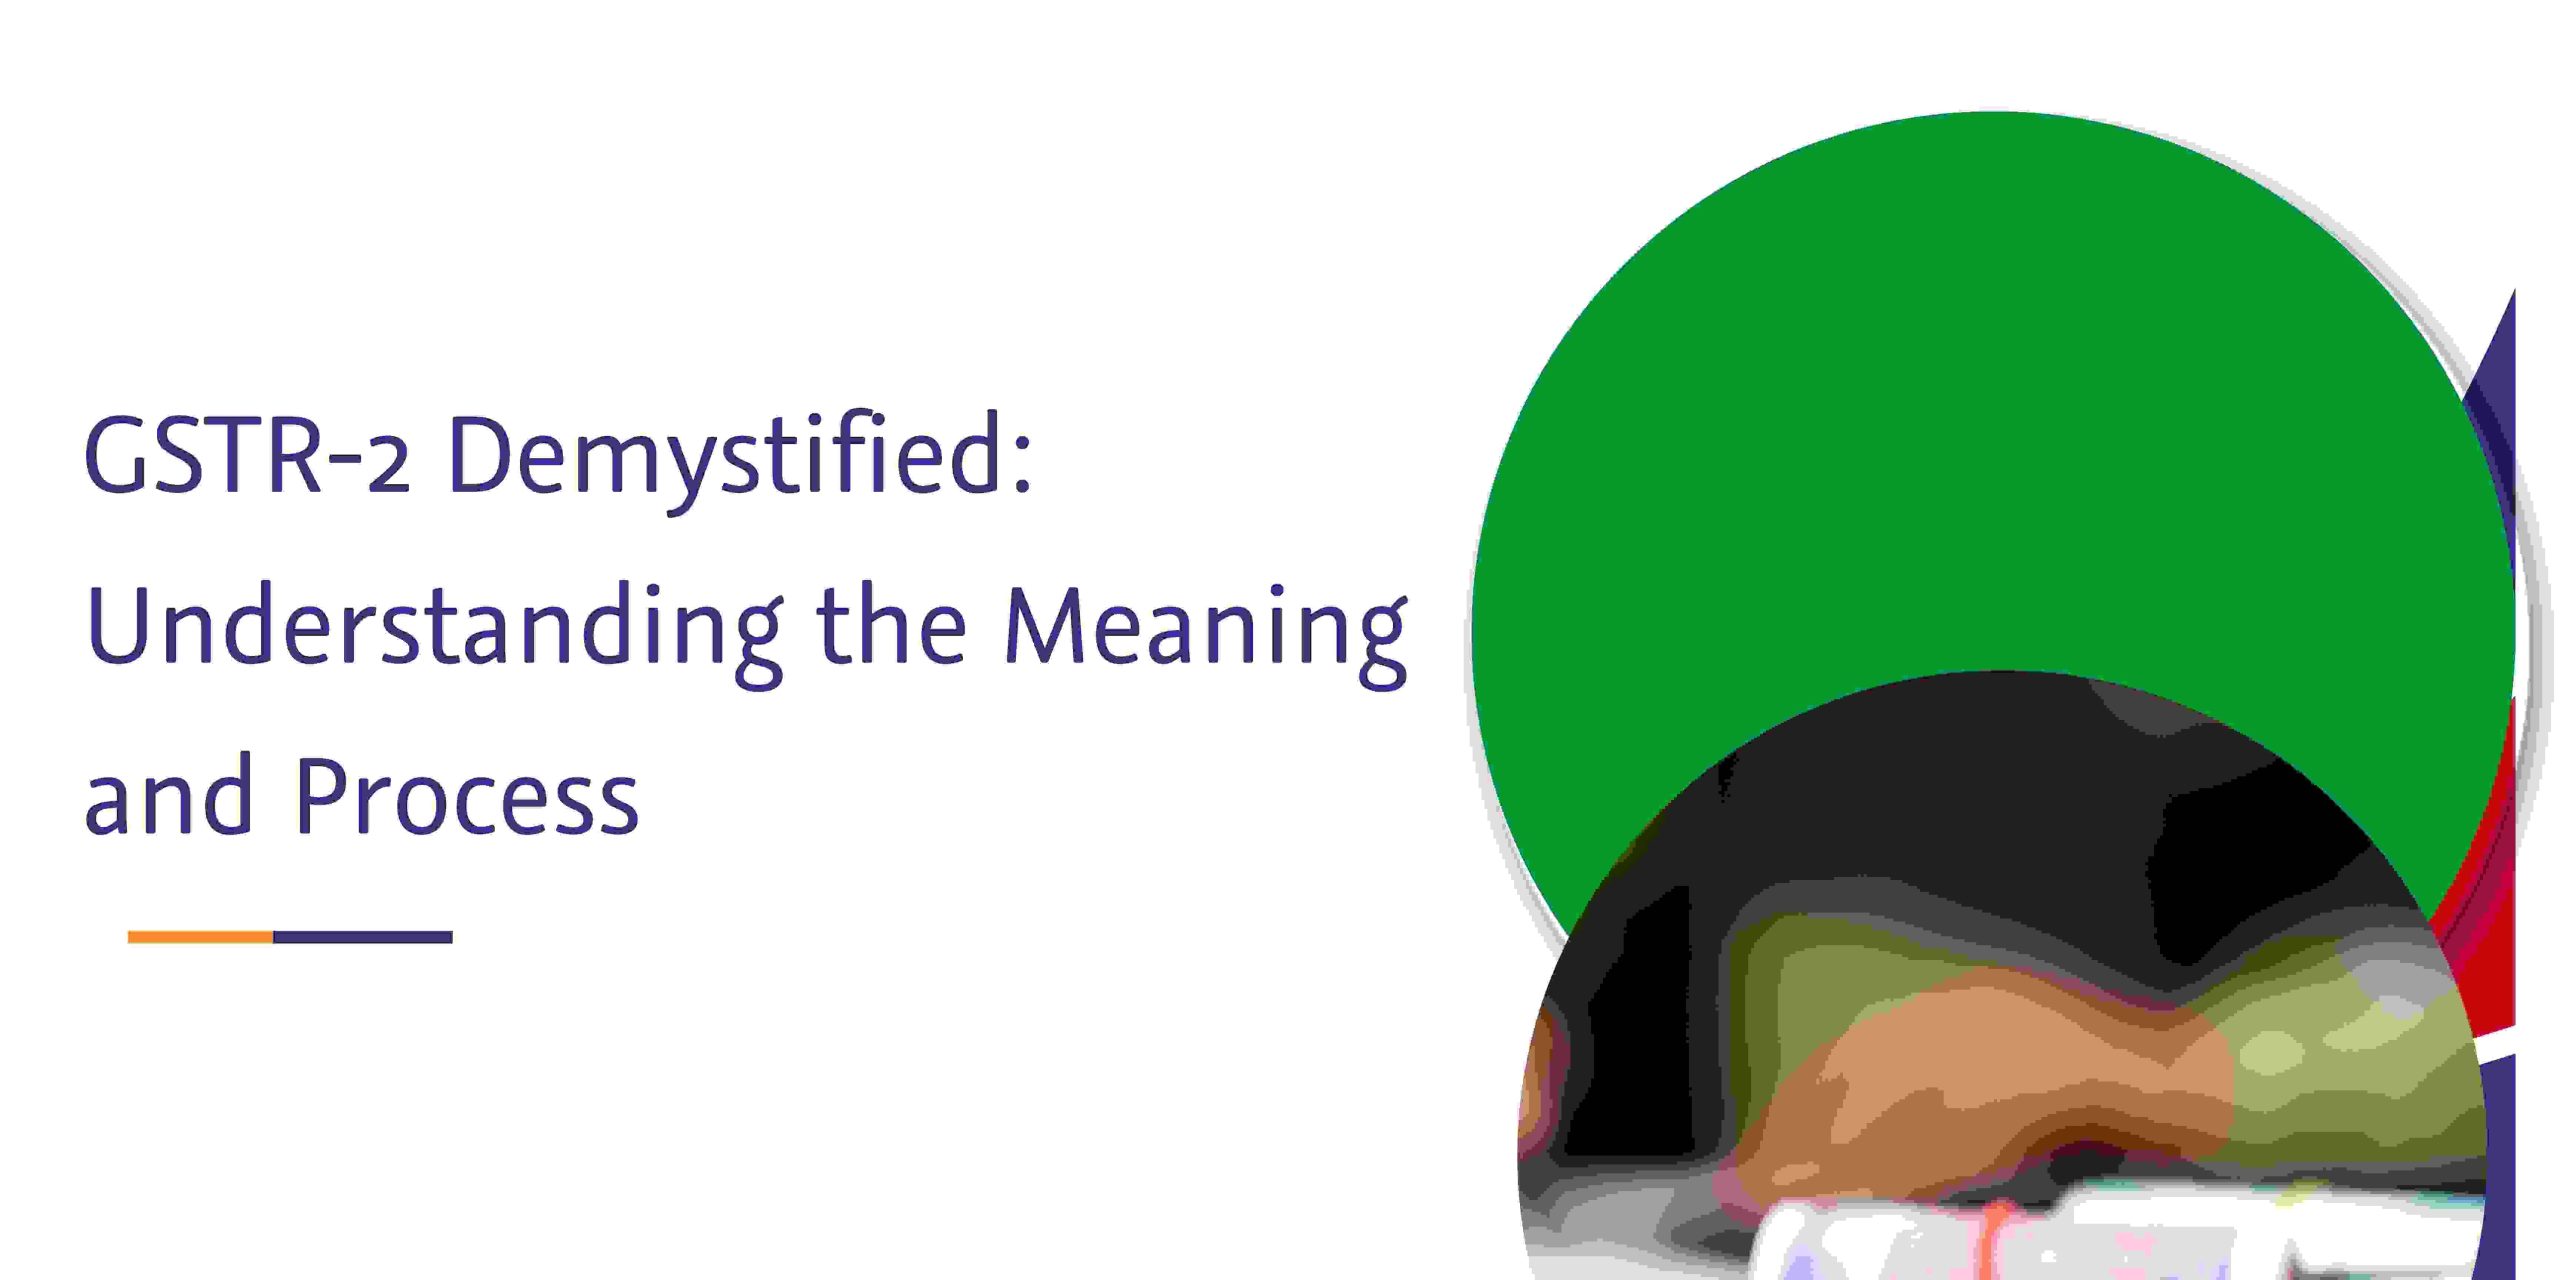 GSTR-2 Demystified -Understanding the Meaning and Process